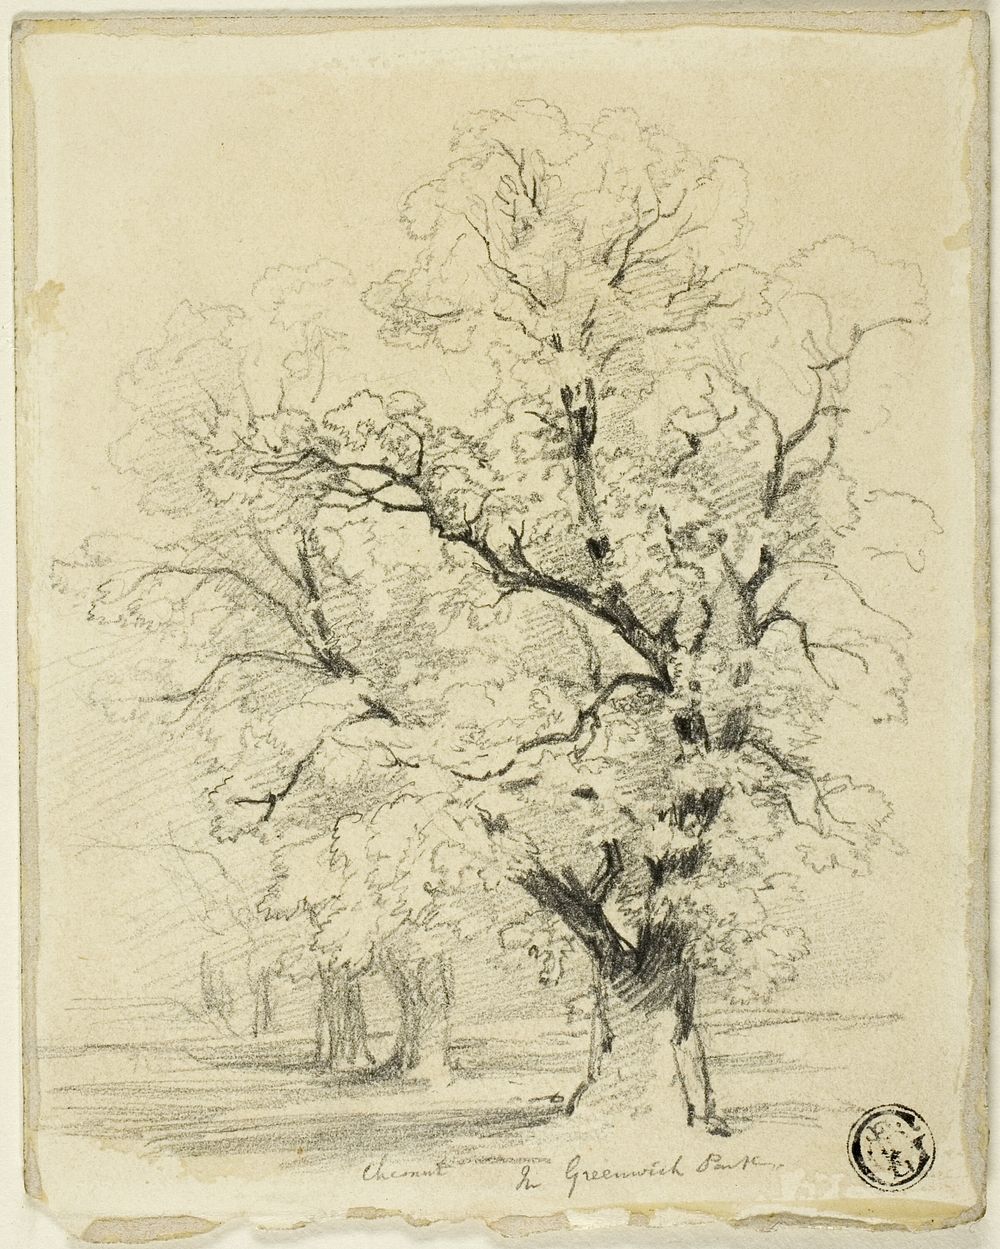 Ches[t]nut in Greenwich Park by Thomas Creswick